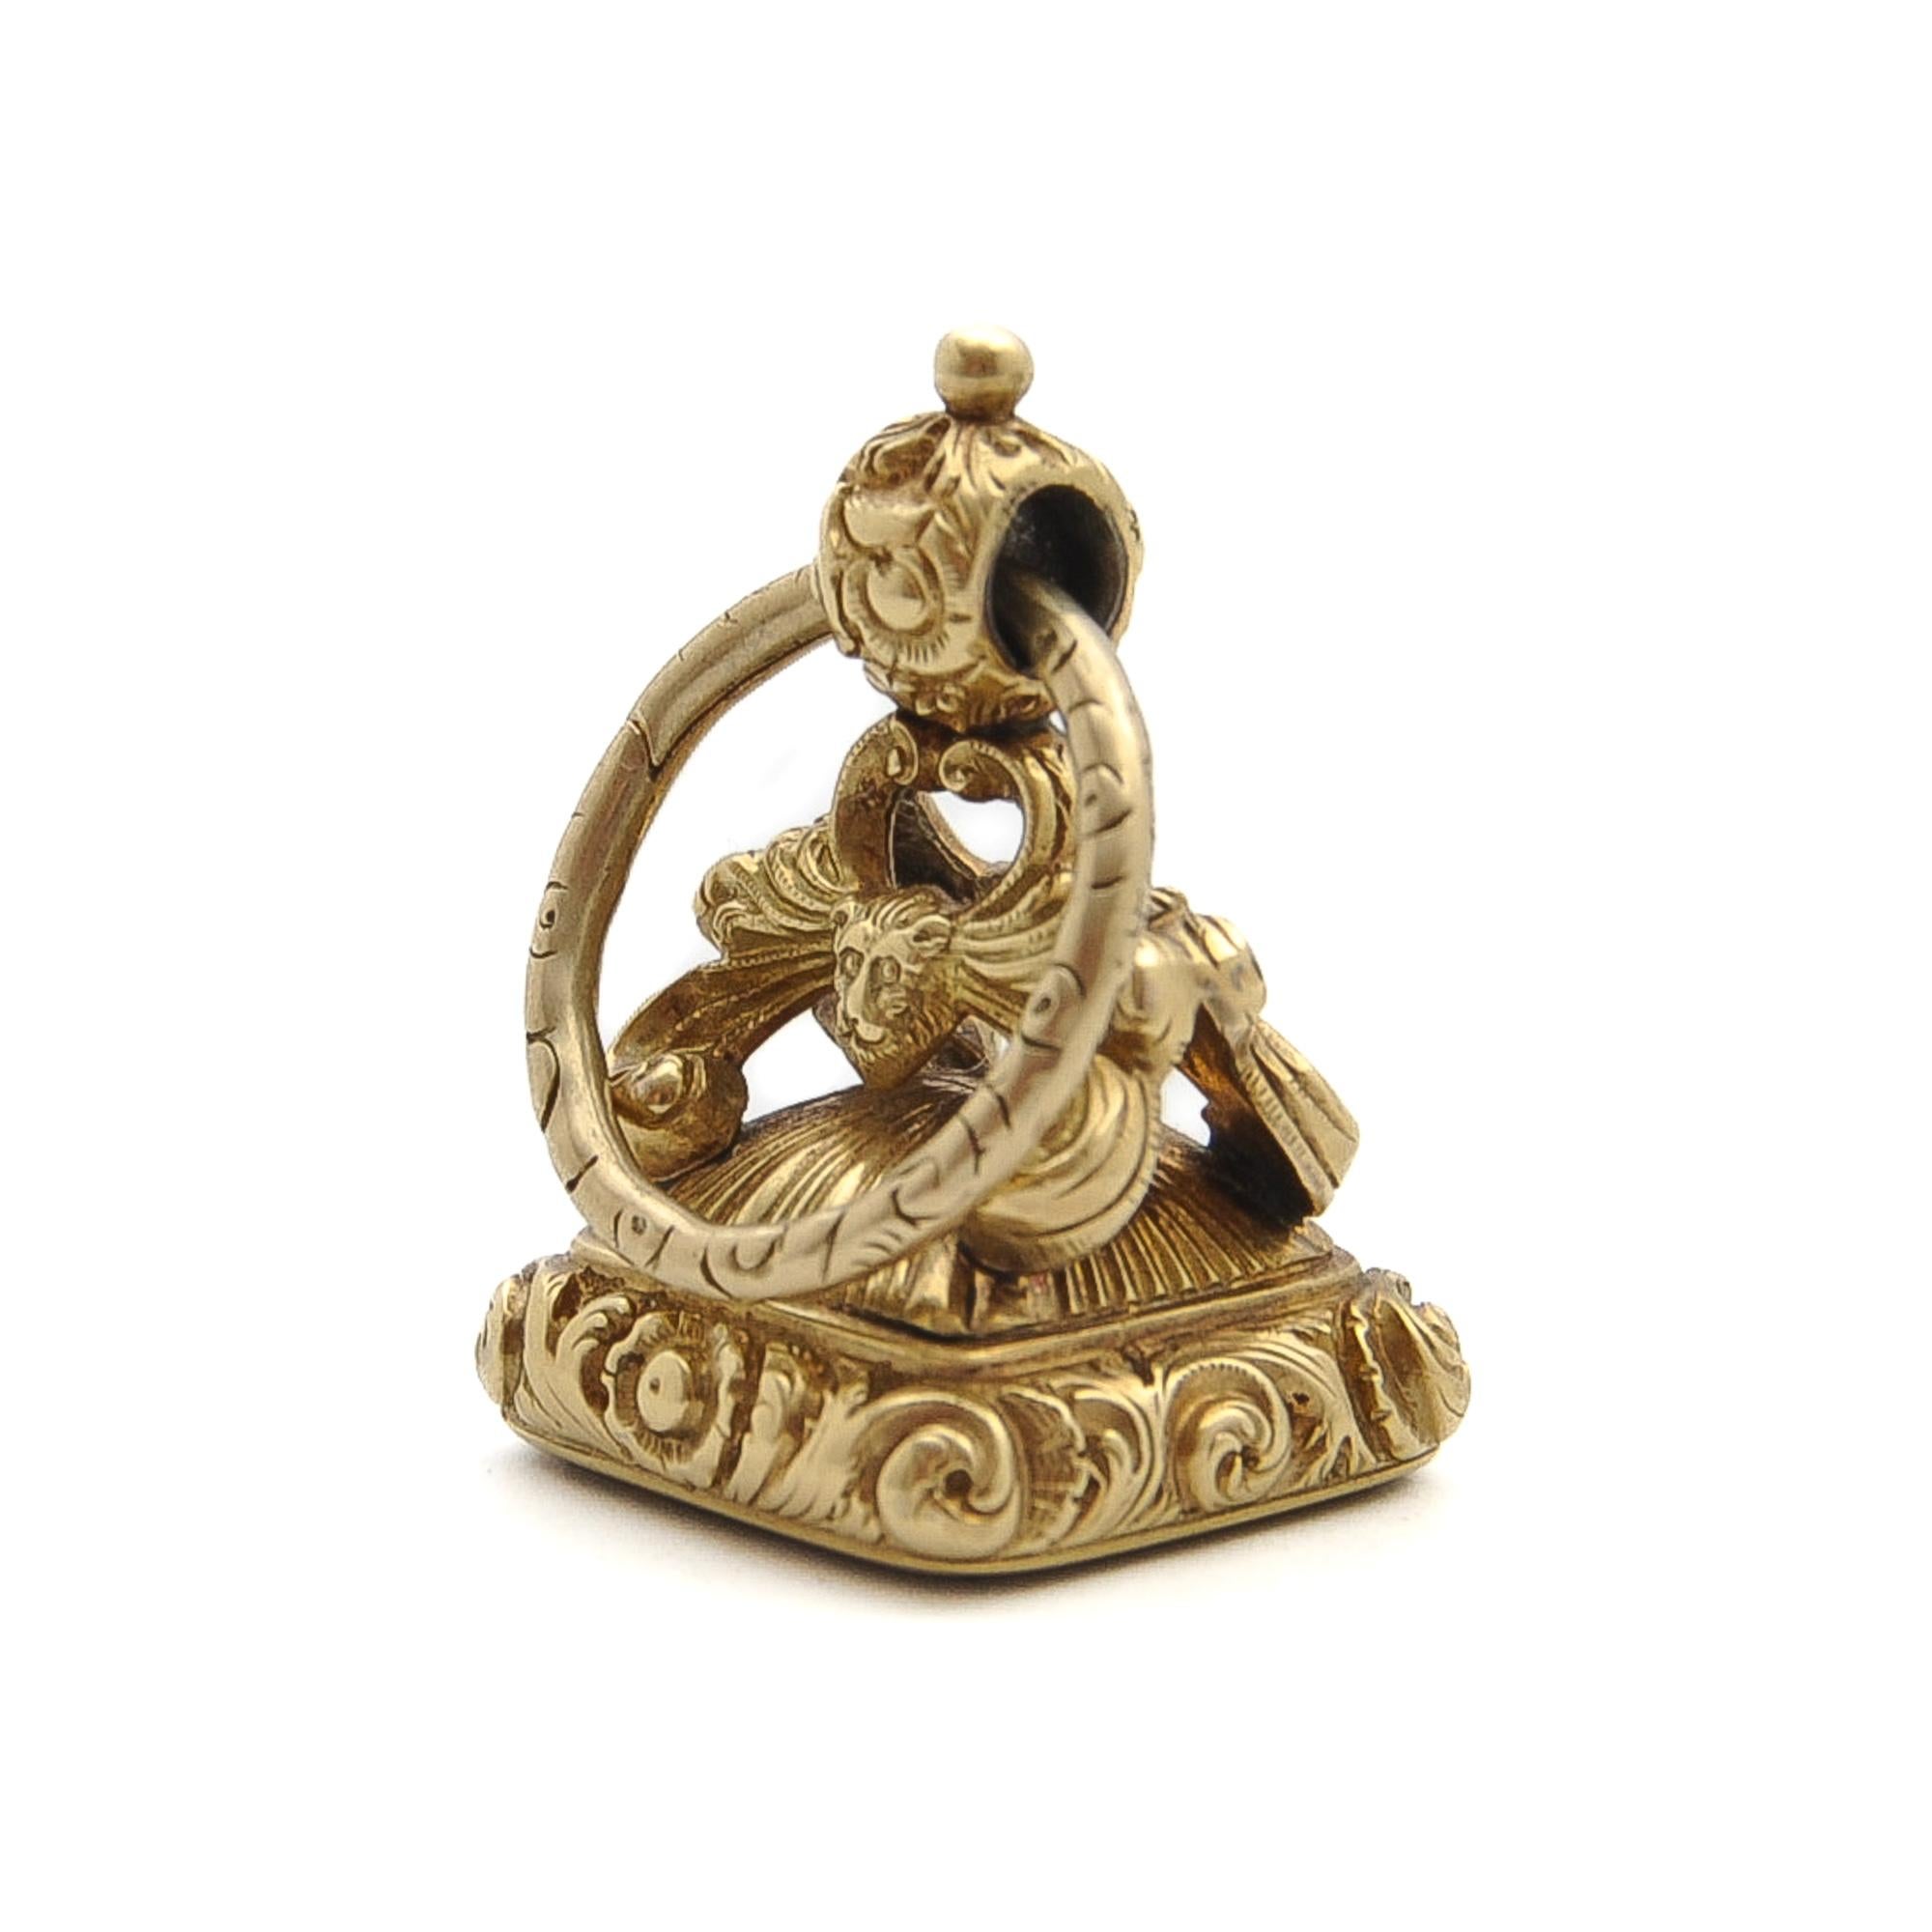 Women's or Men's Antique Victorian 15K Gold and Carnelian Ornate Fob Charm Pendant For Sale